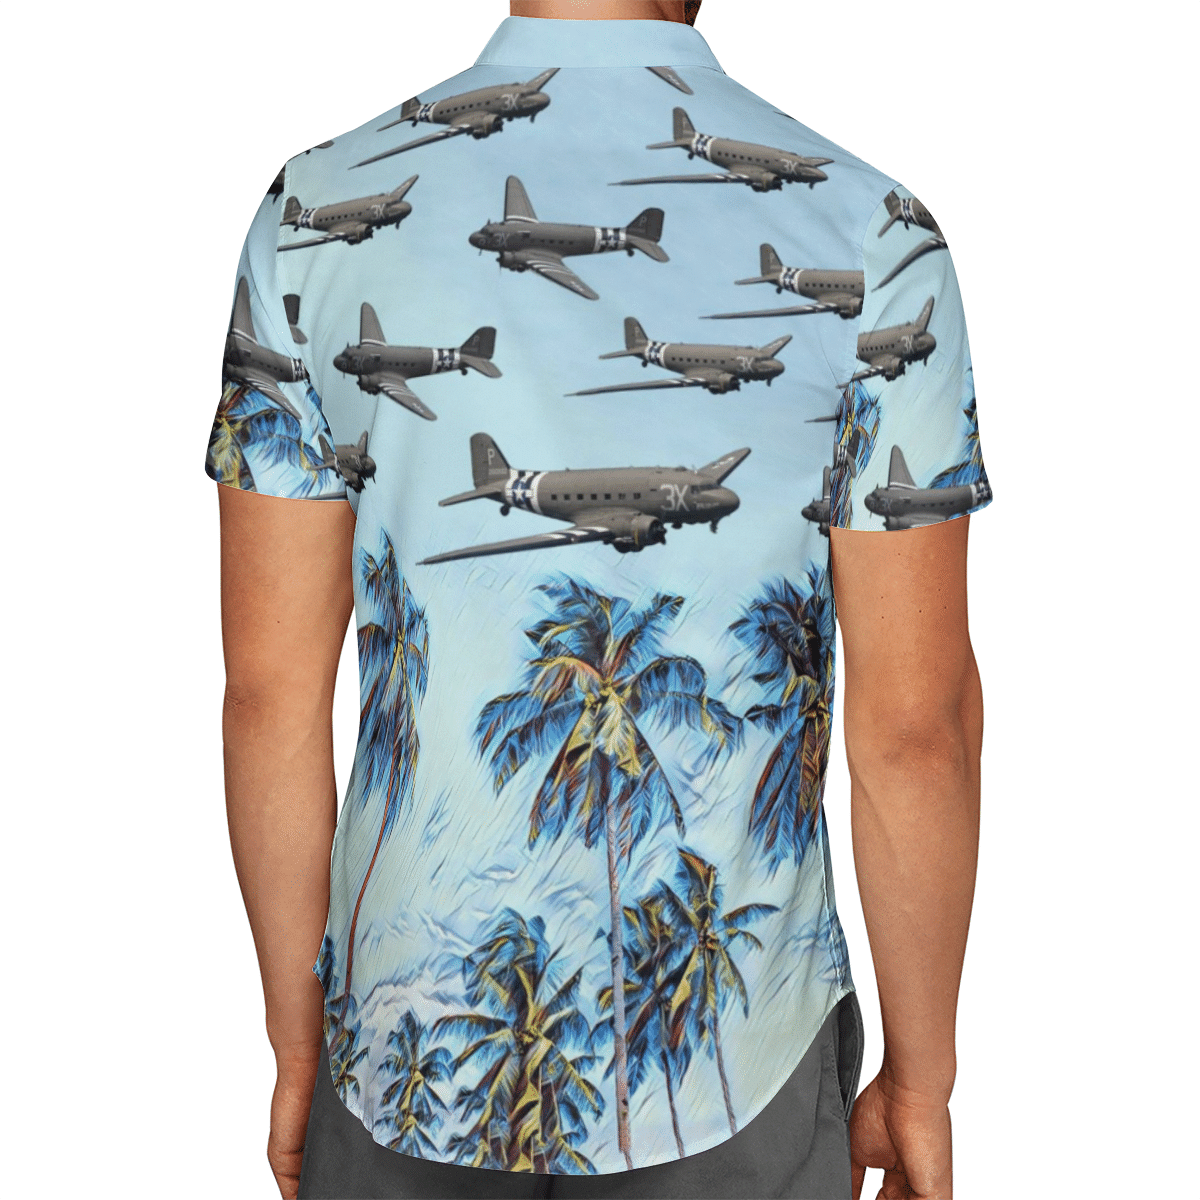 Going to the beach with a quality shirt 210